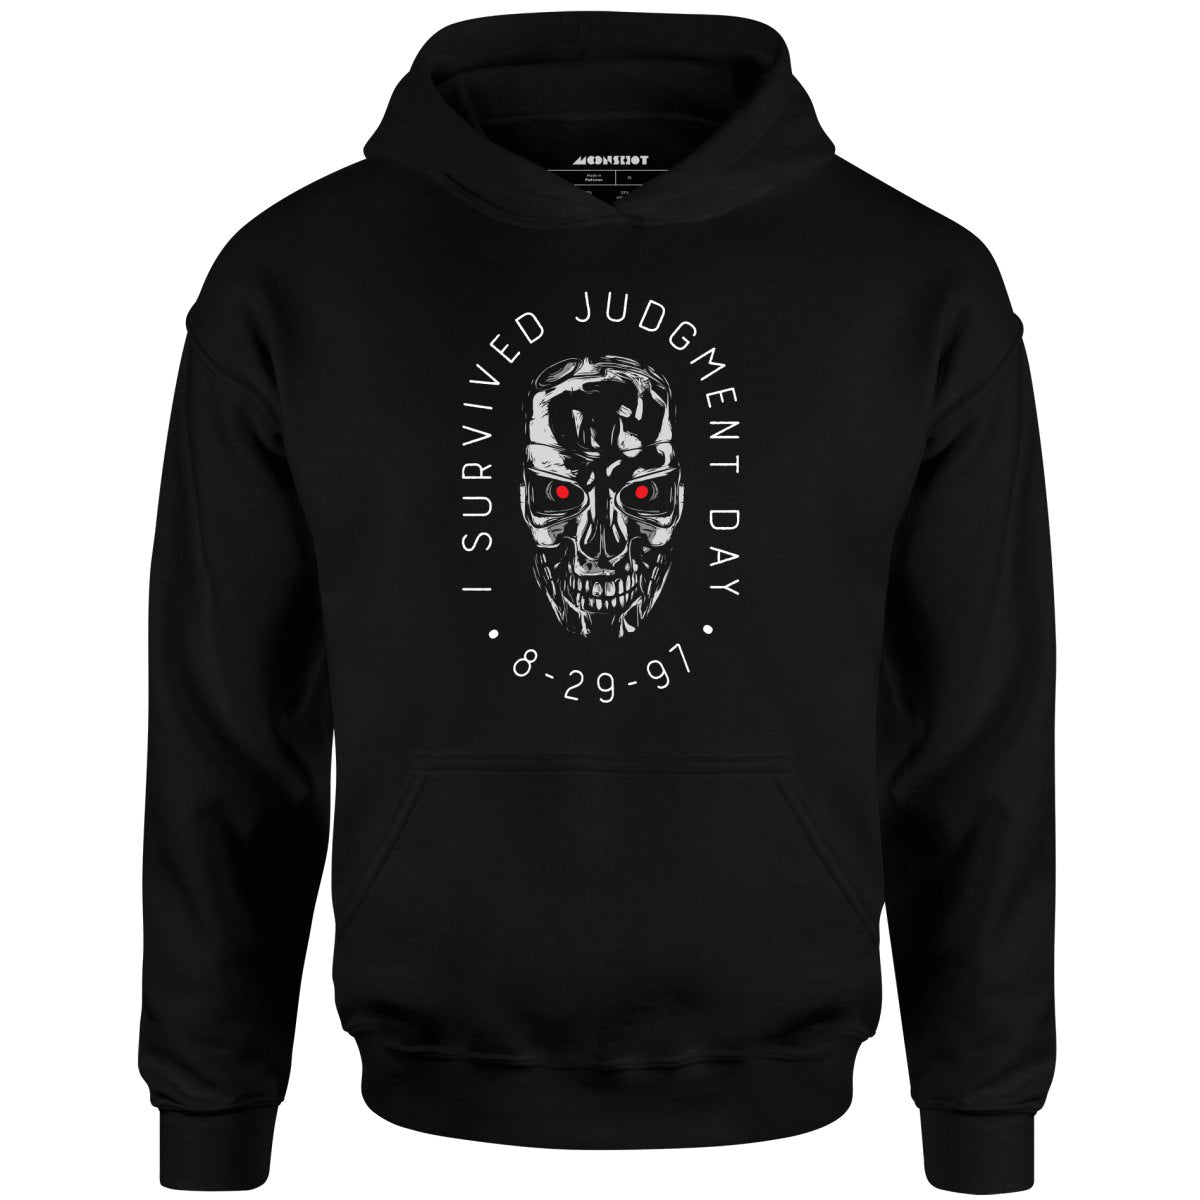 I Survived Judgment Day - Unisex Hoodie